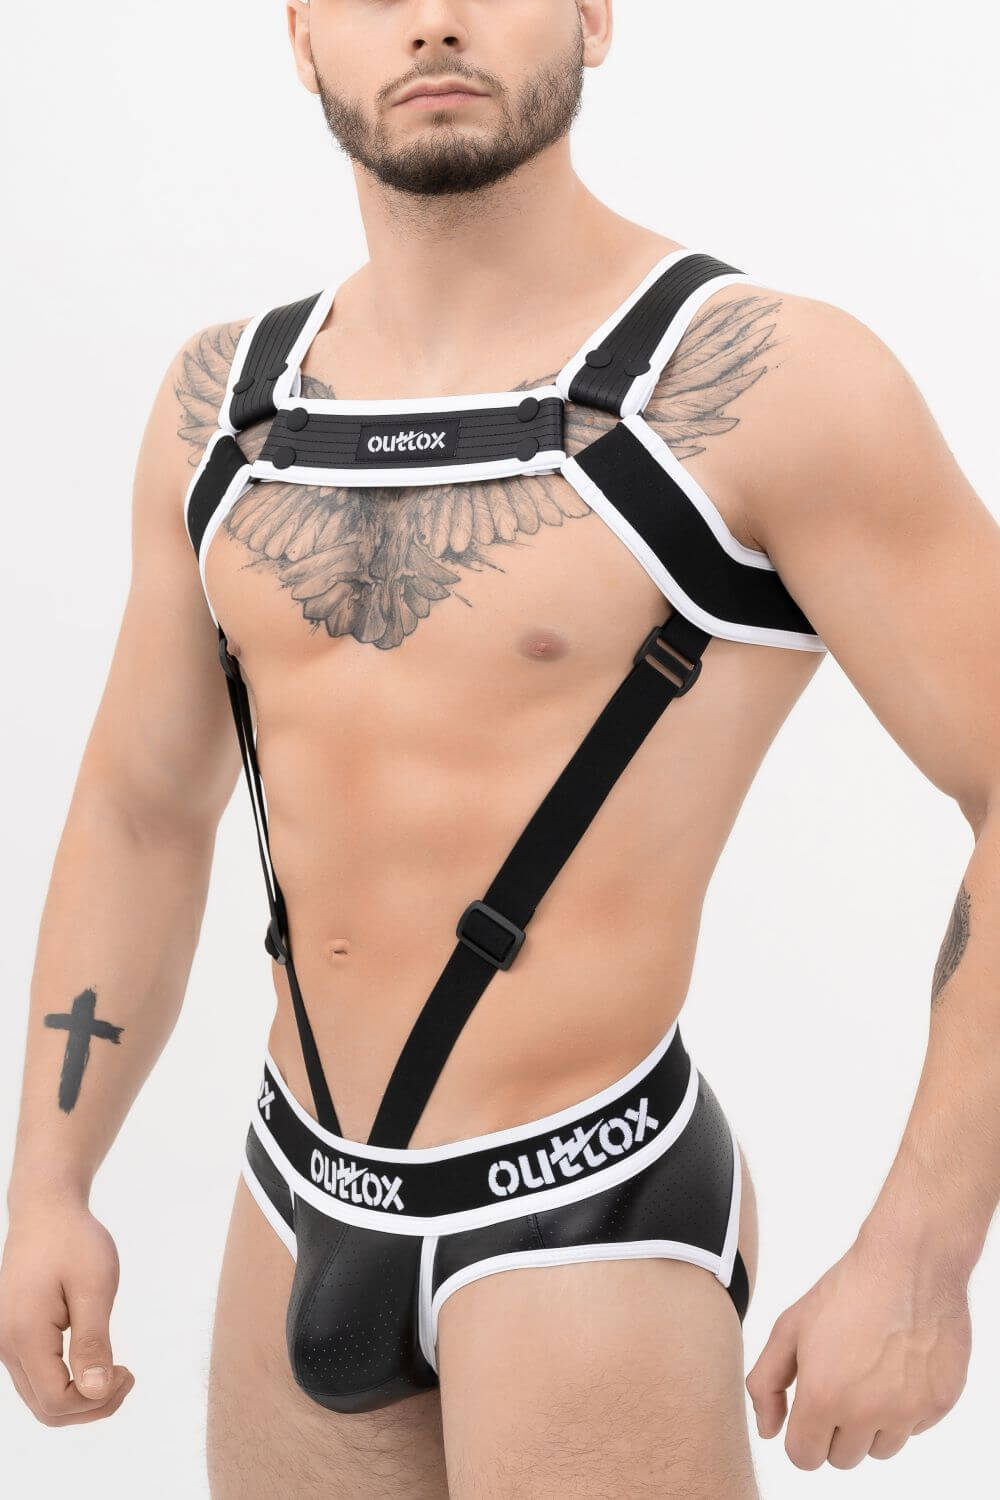 Outtox. Body Harness with Snaps. Black+White